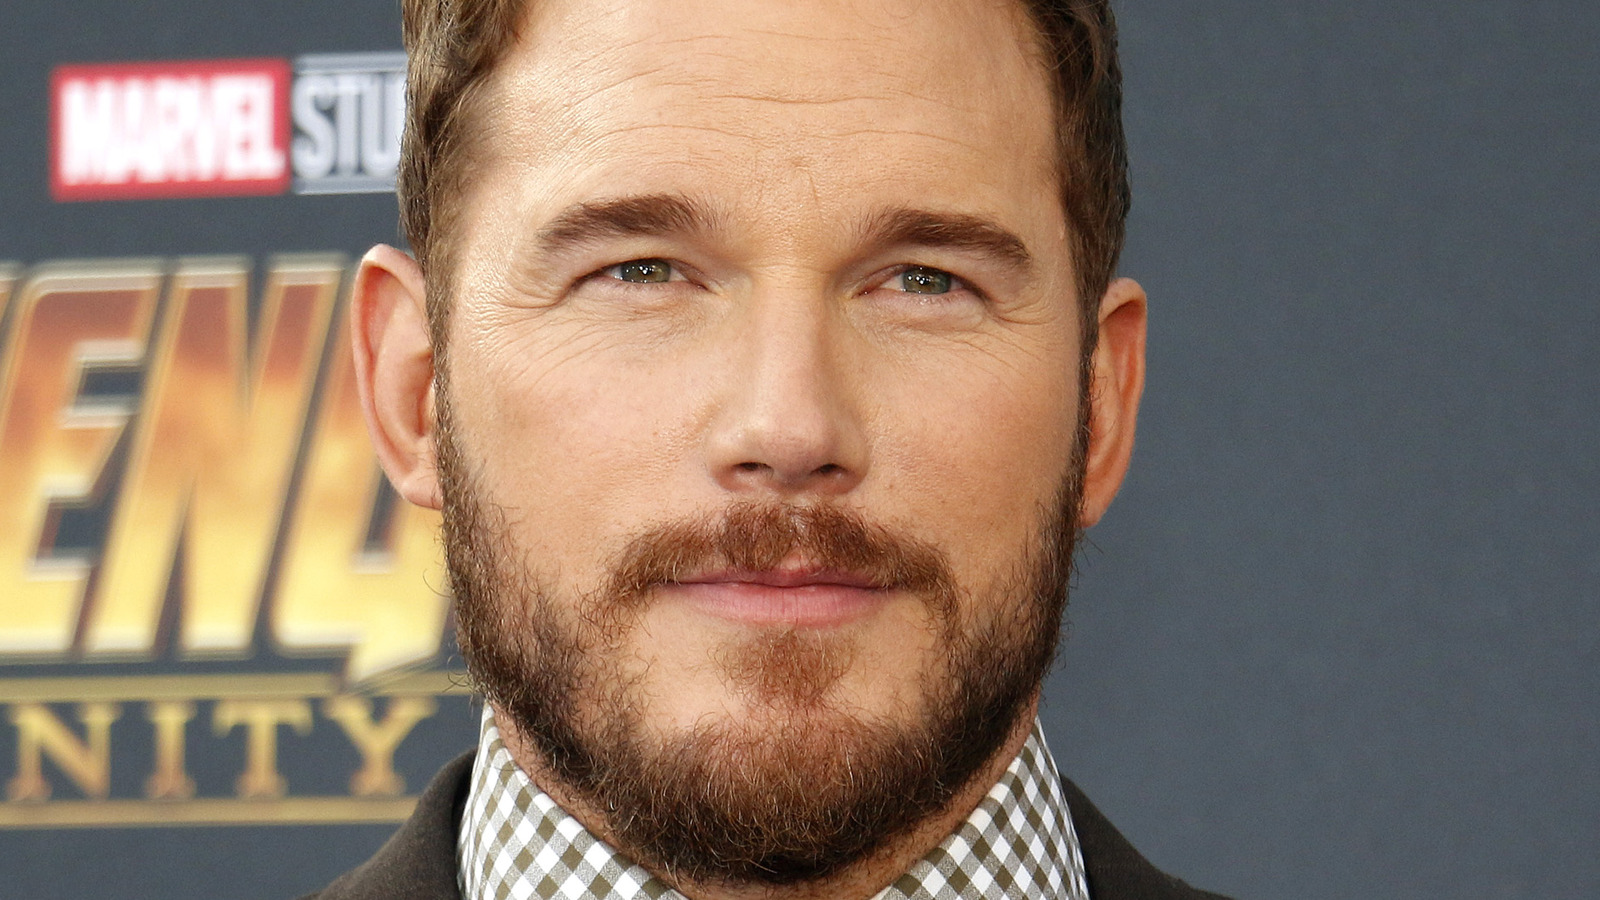 The Transformation Of Chris Pratt From 19 To 41 Years Old